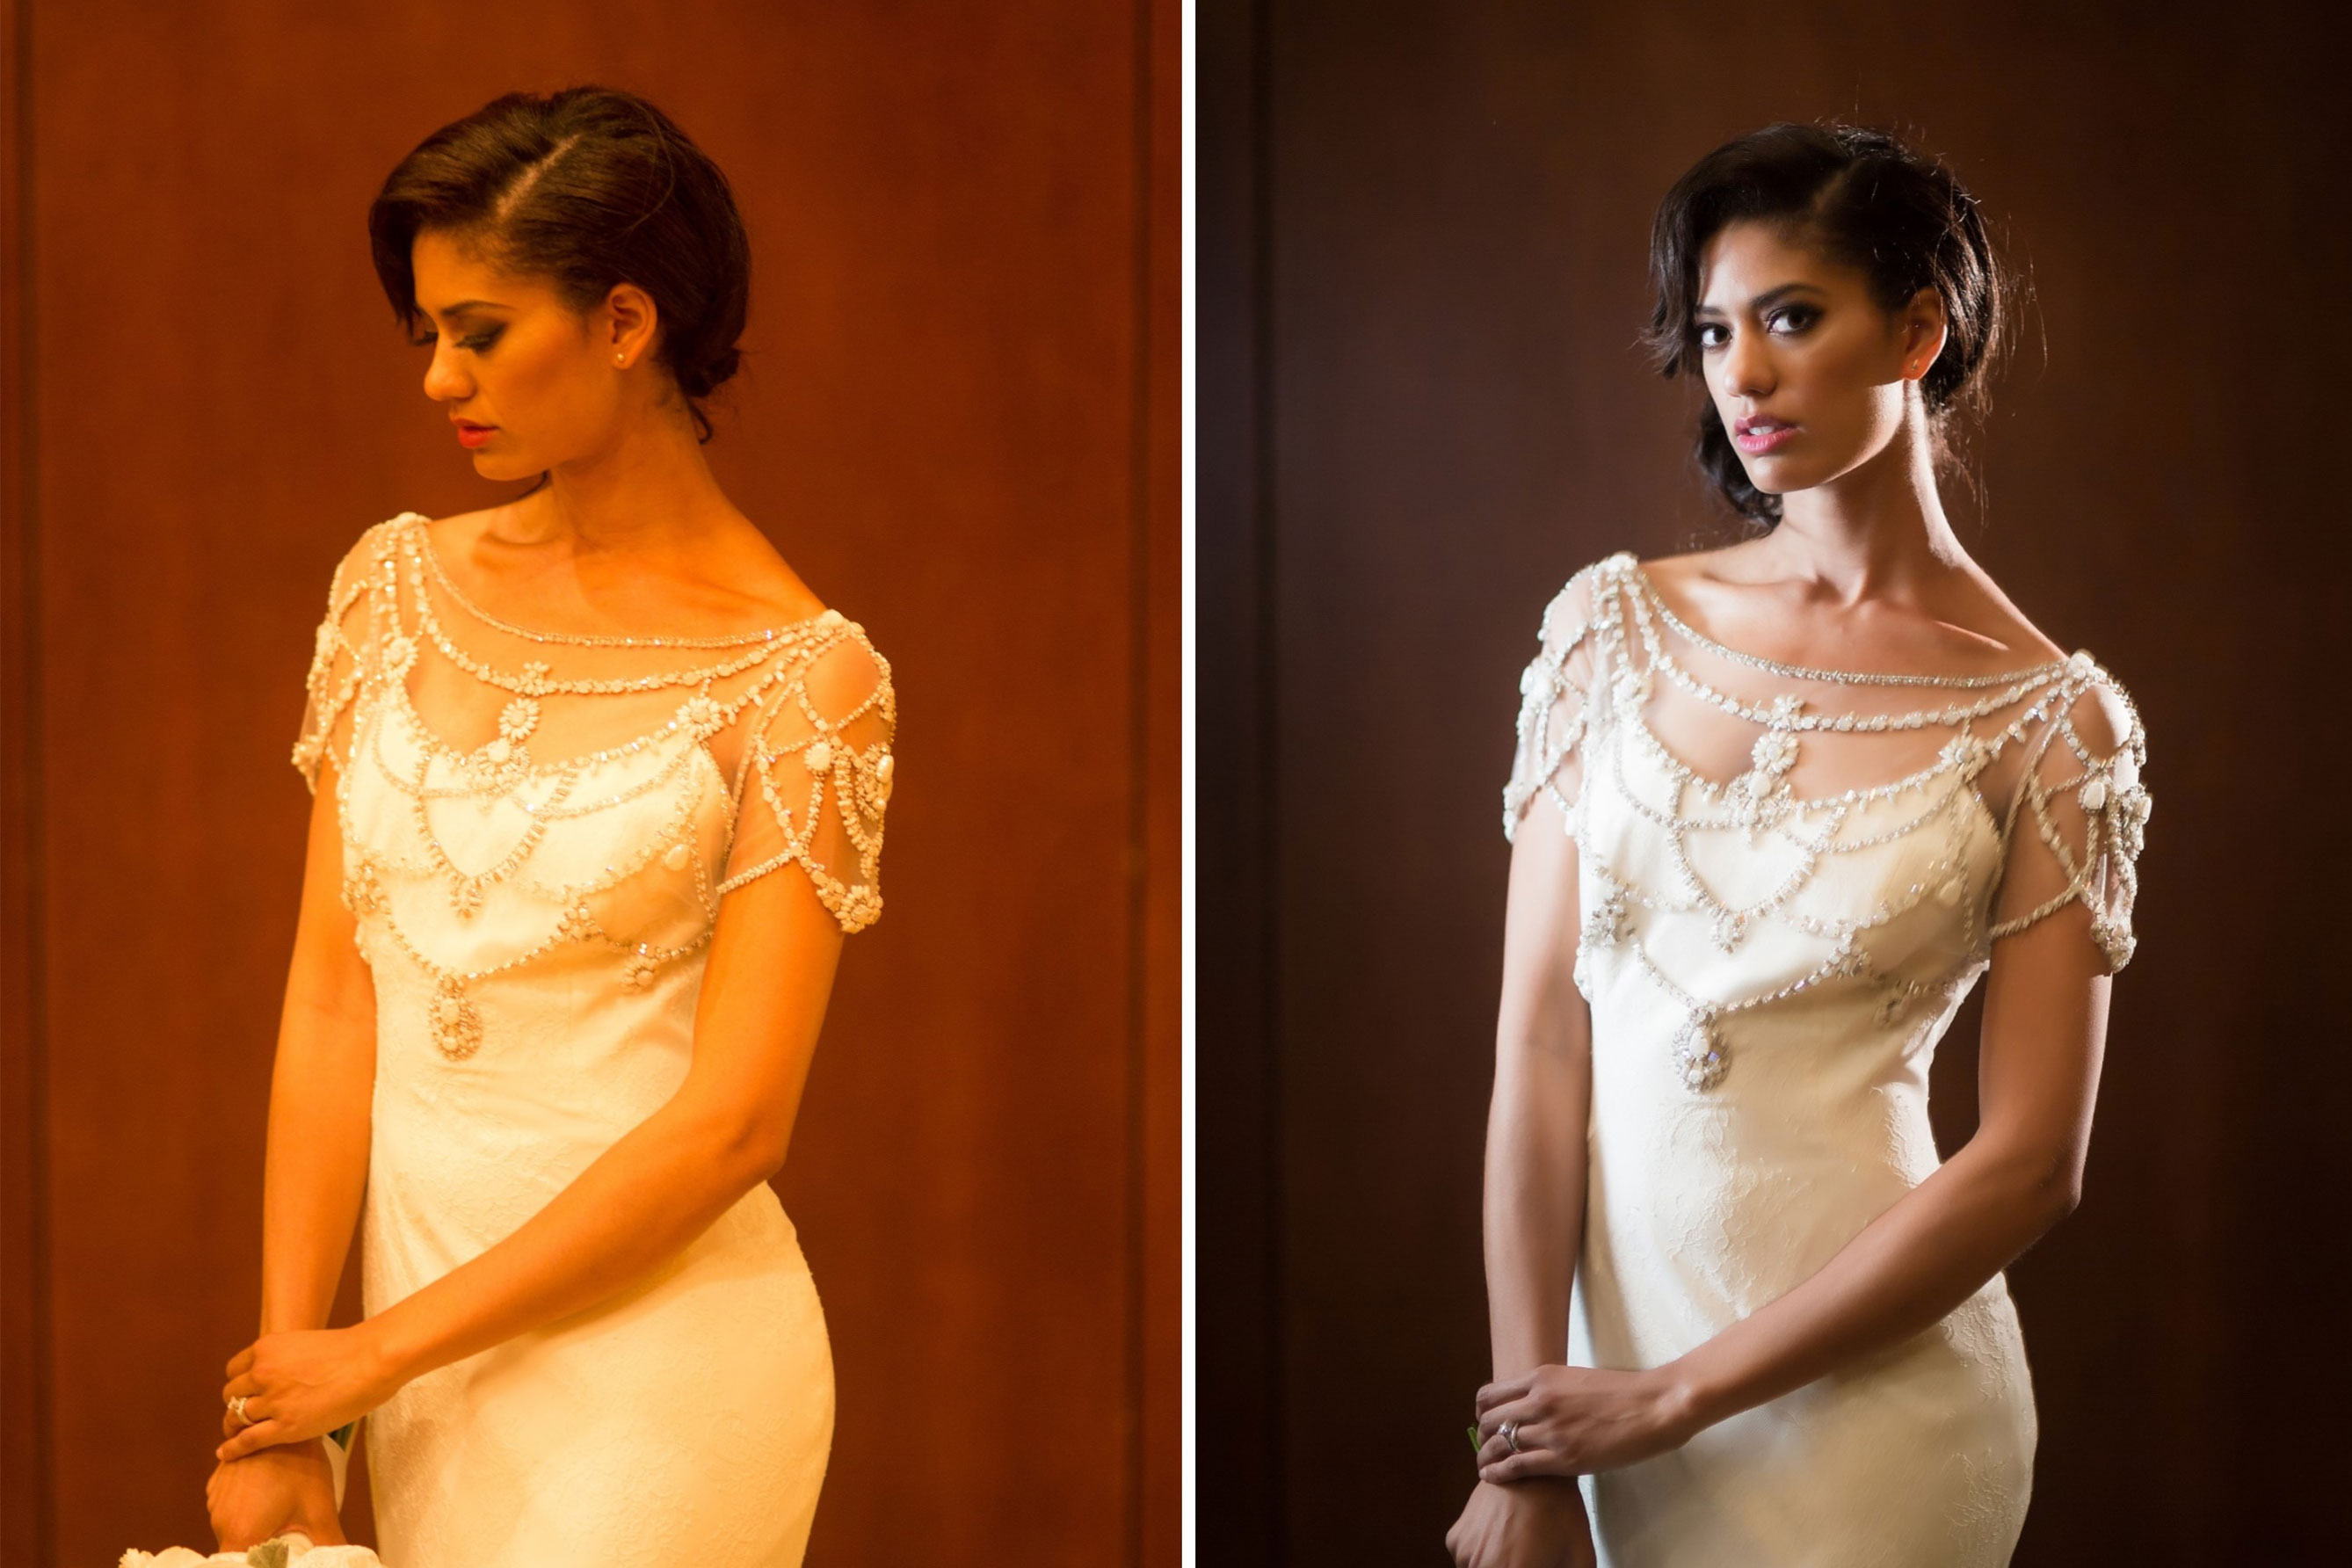 Wedding Workshop Three | Photographing The Bride: Poses & Lighting Will Be Your Savior